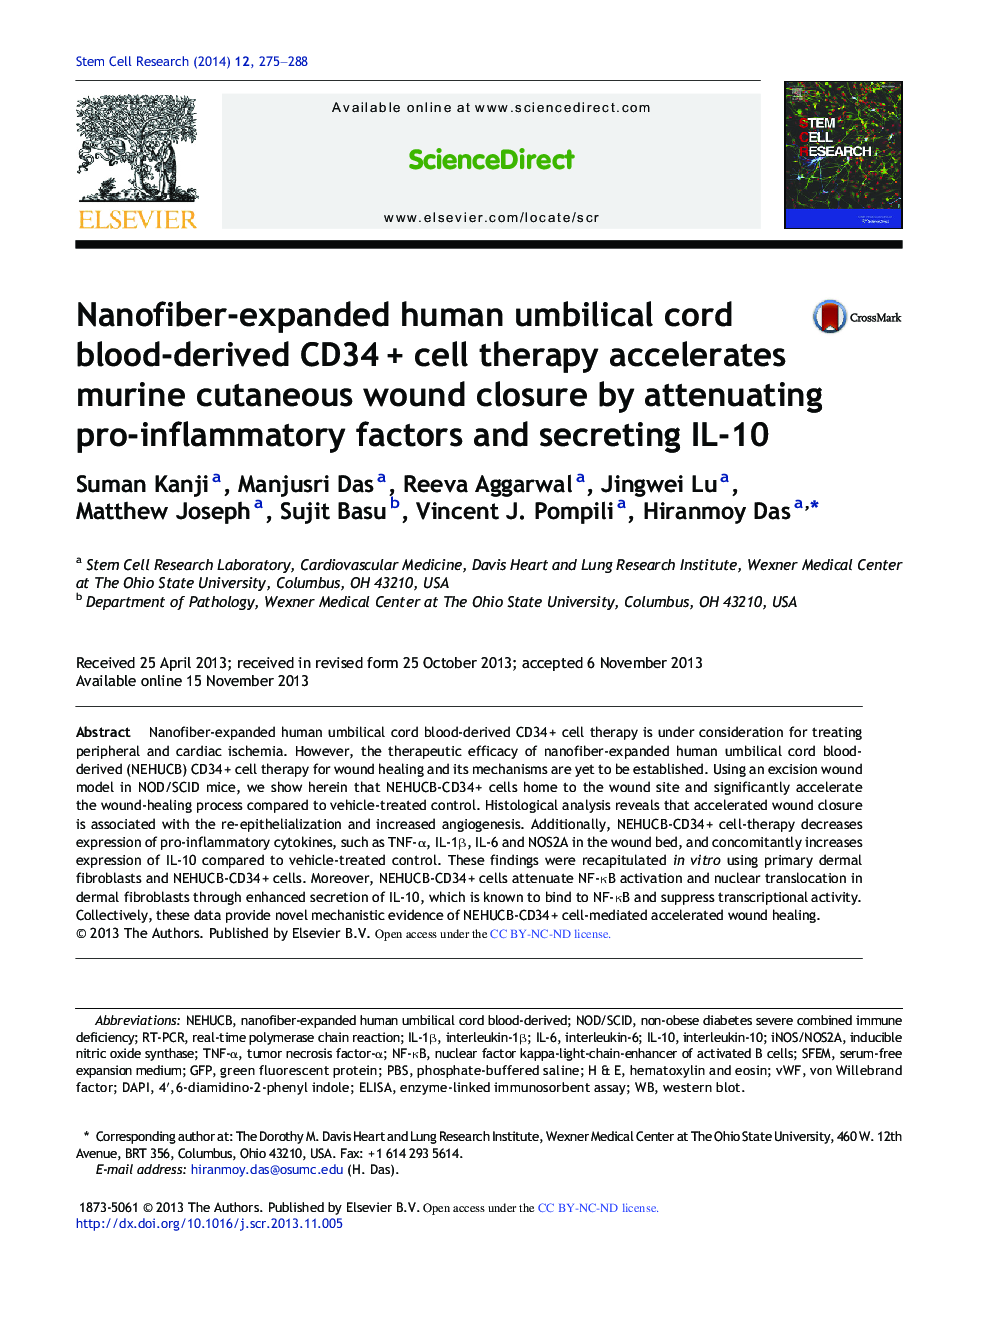 Nanofiber-expanded human umbilical cord blood-derived CD34 + cell therapy accelerates murine cutaneous wound closure by attenuating pro-inflammatory factors and secreting IL-10